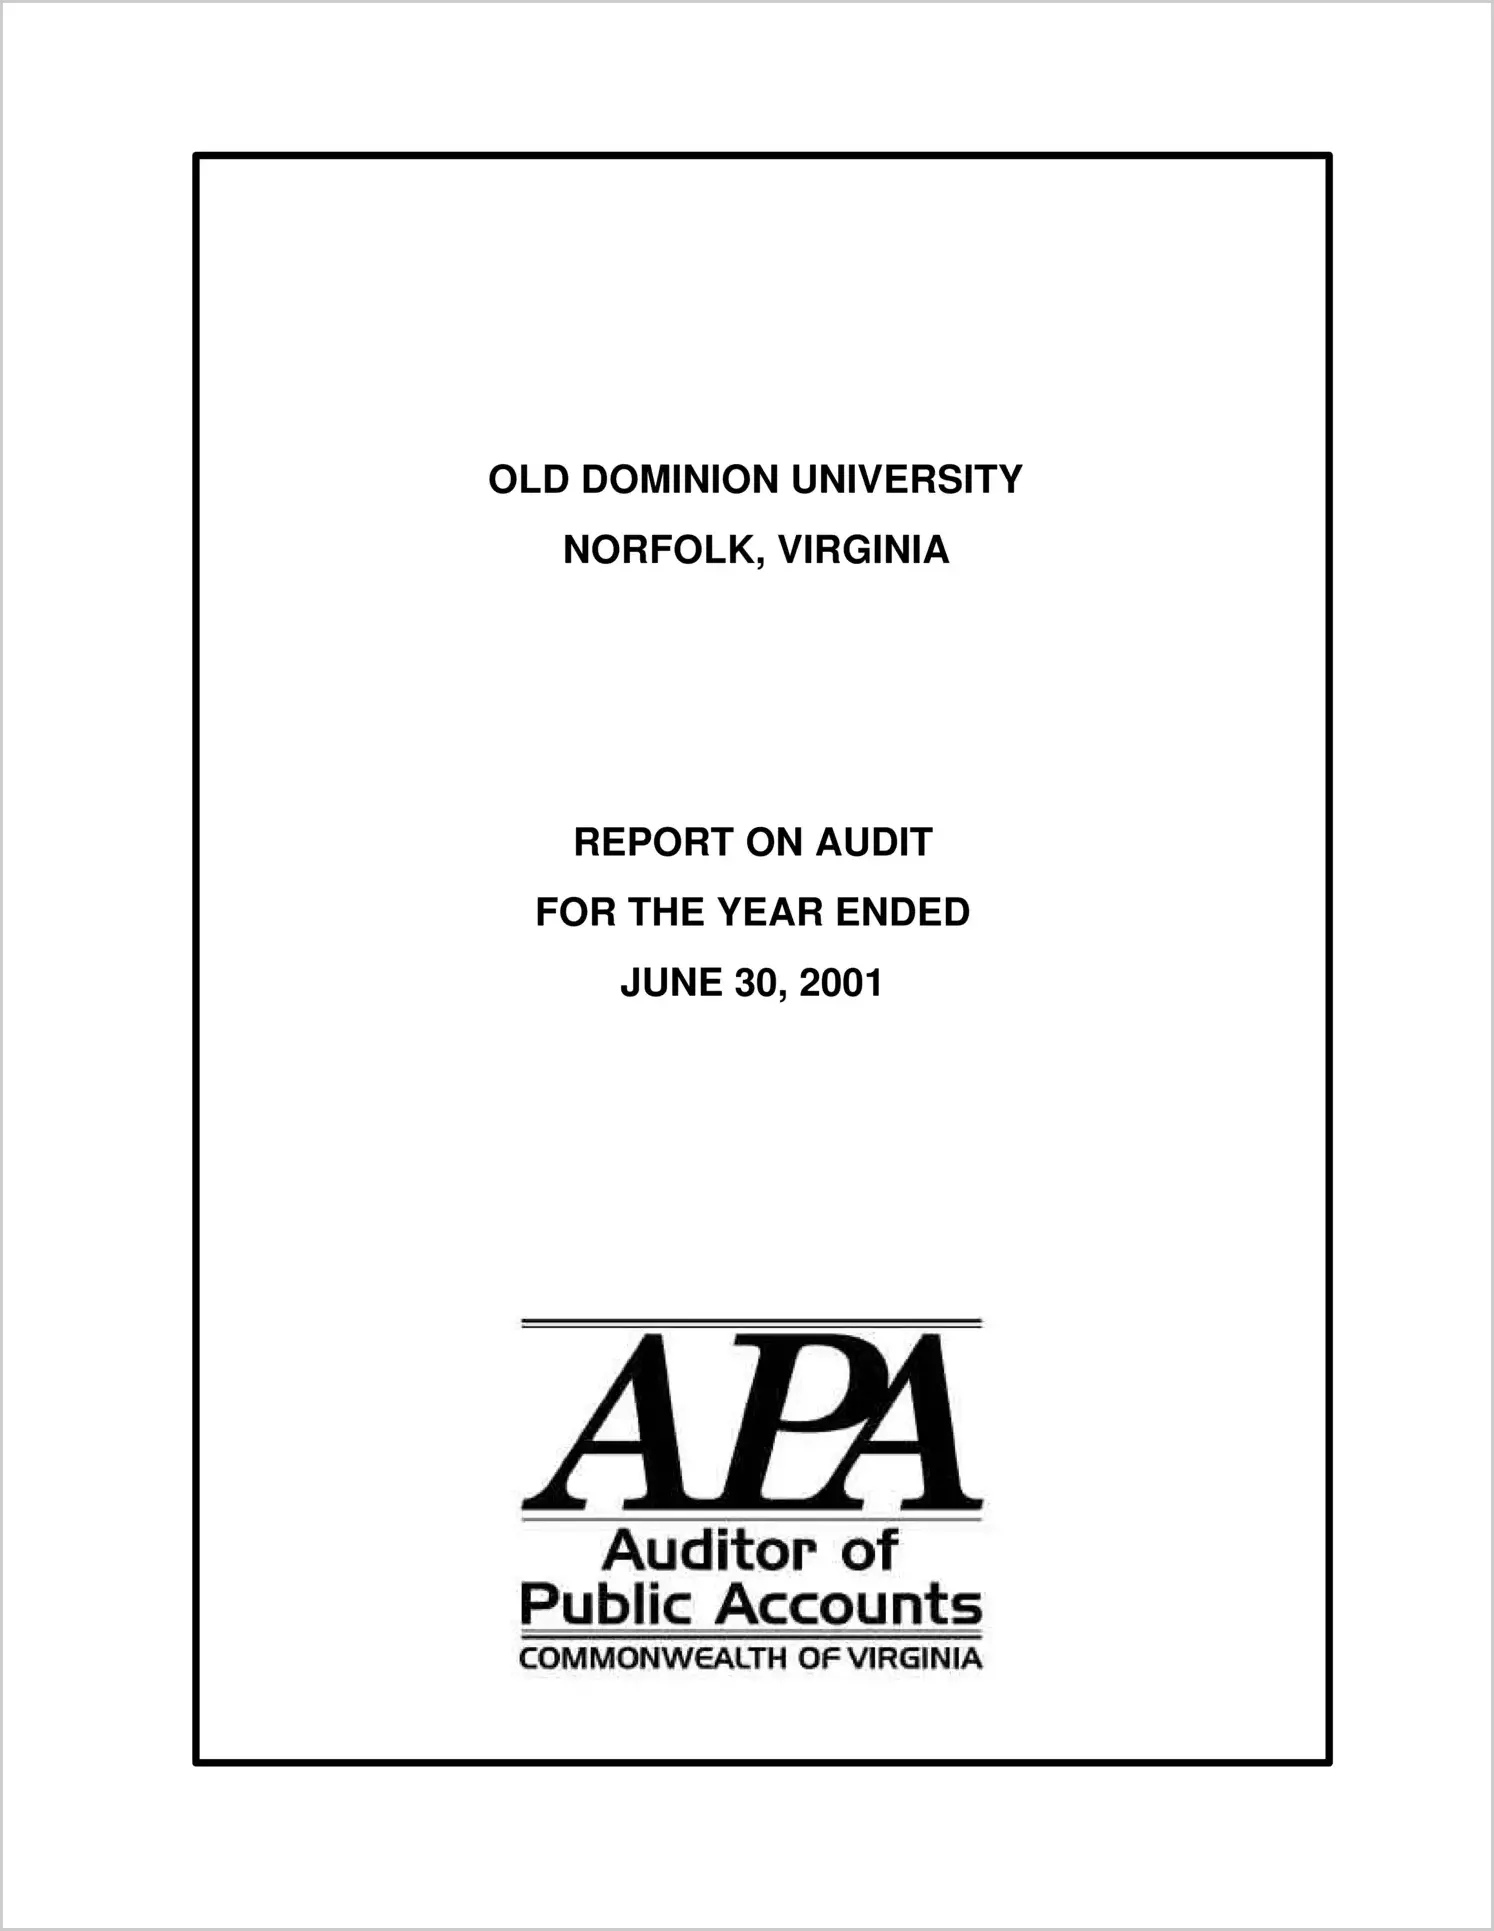 Old Dominion University for the year ended June 30, 2001